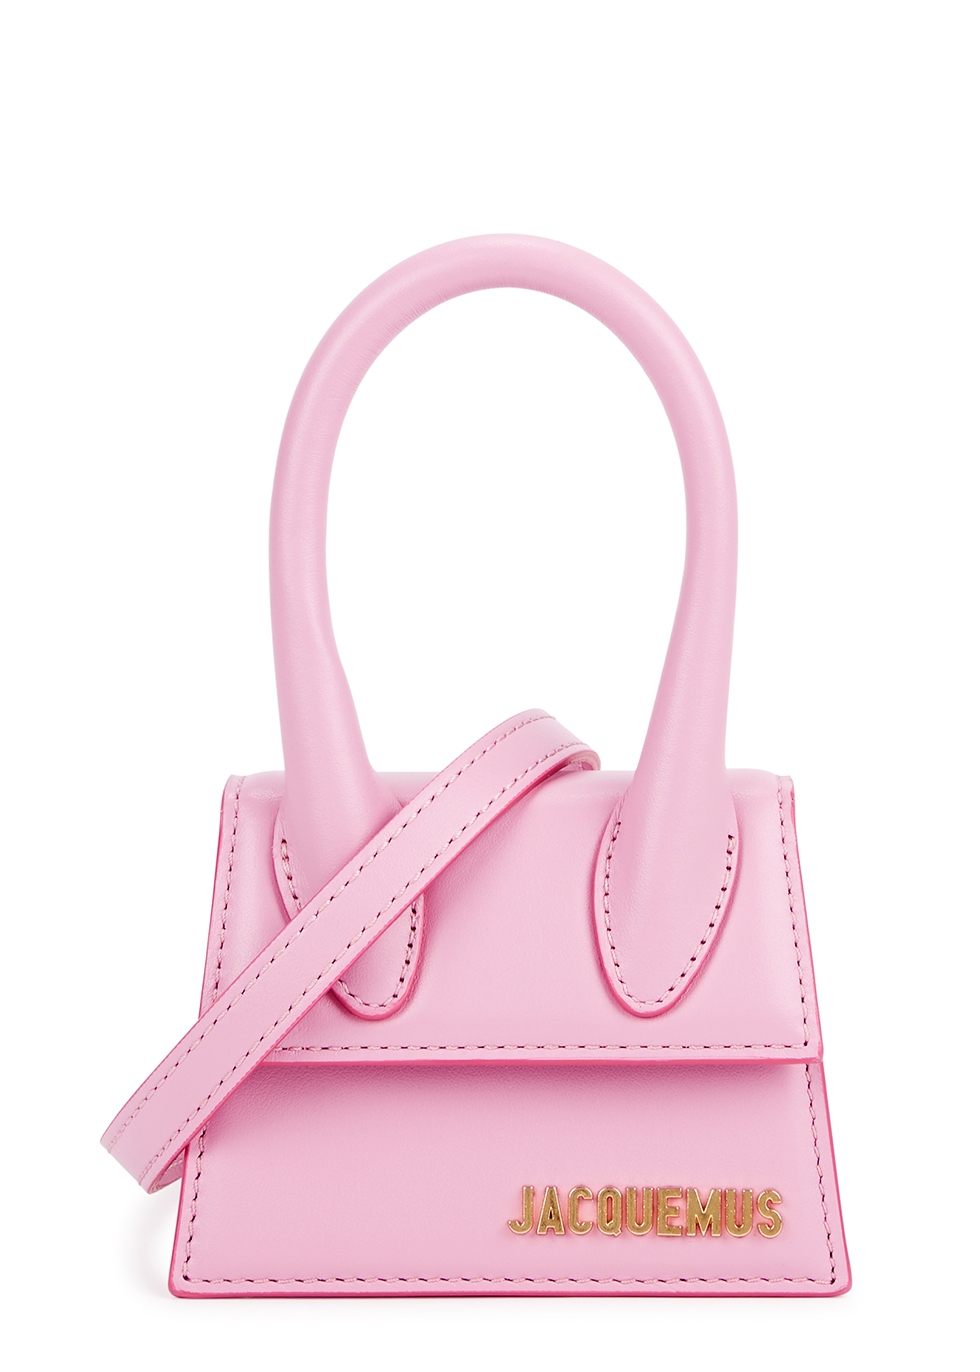 Le Chiquito pink leather top handle bag